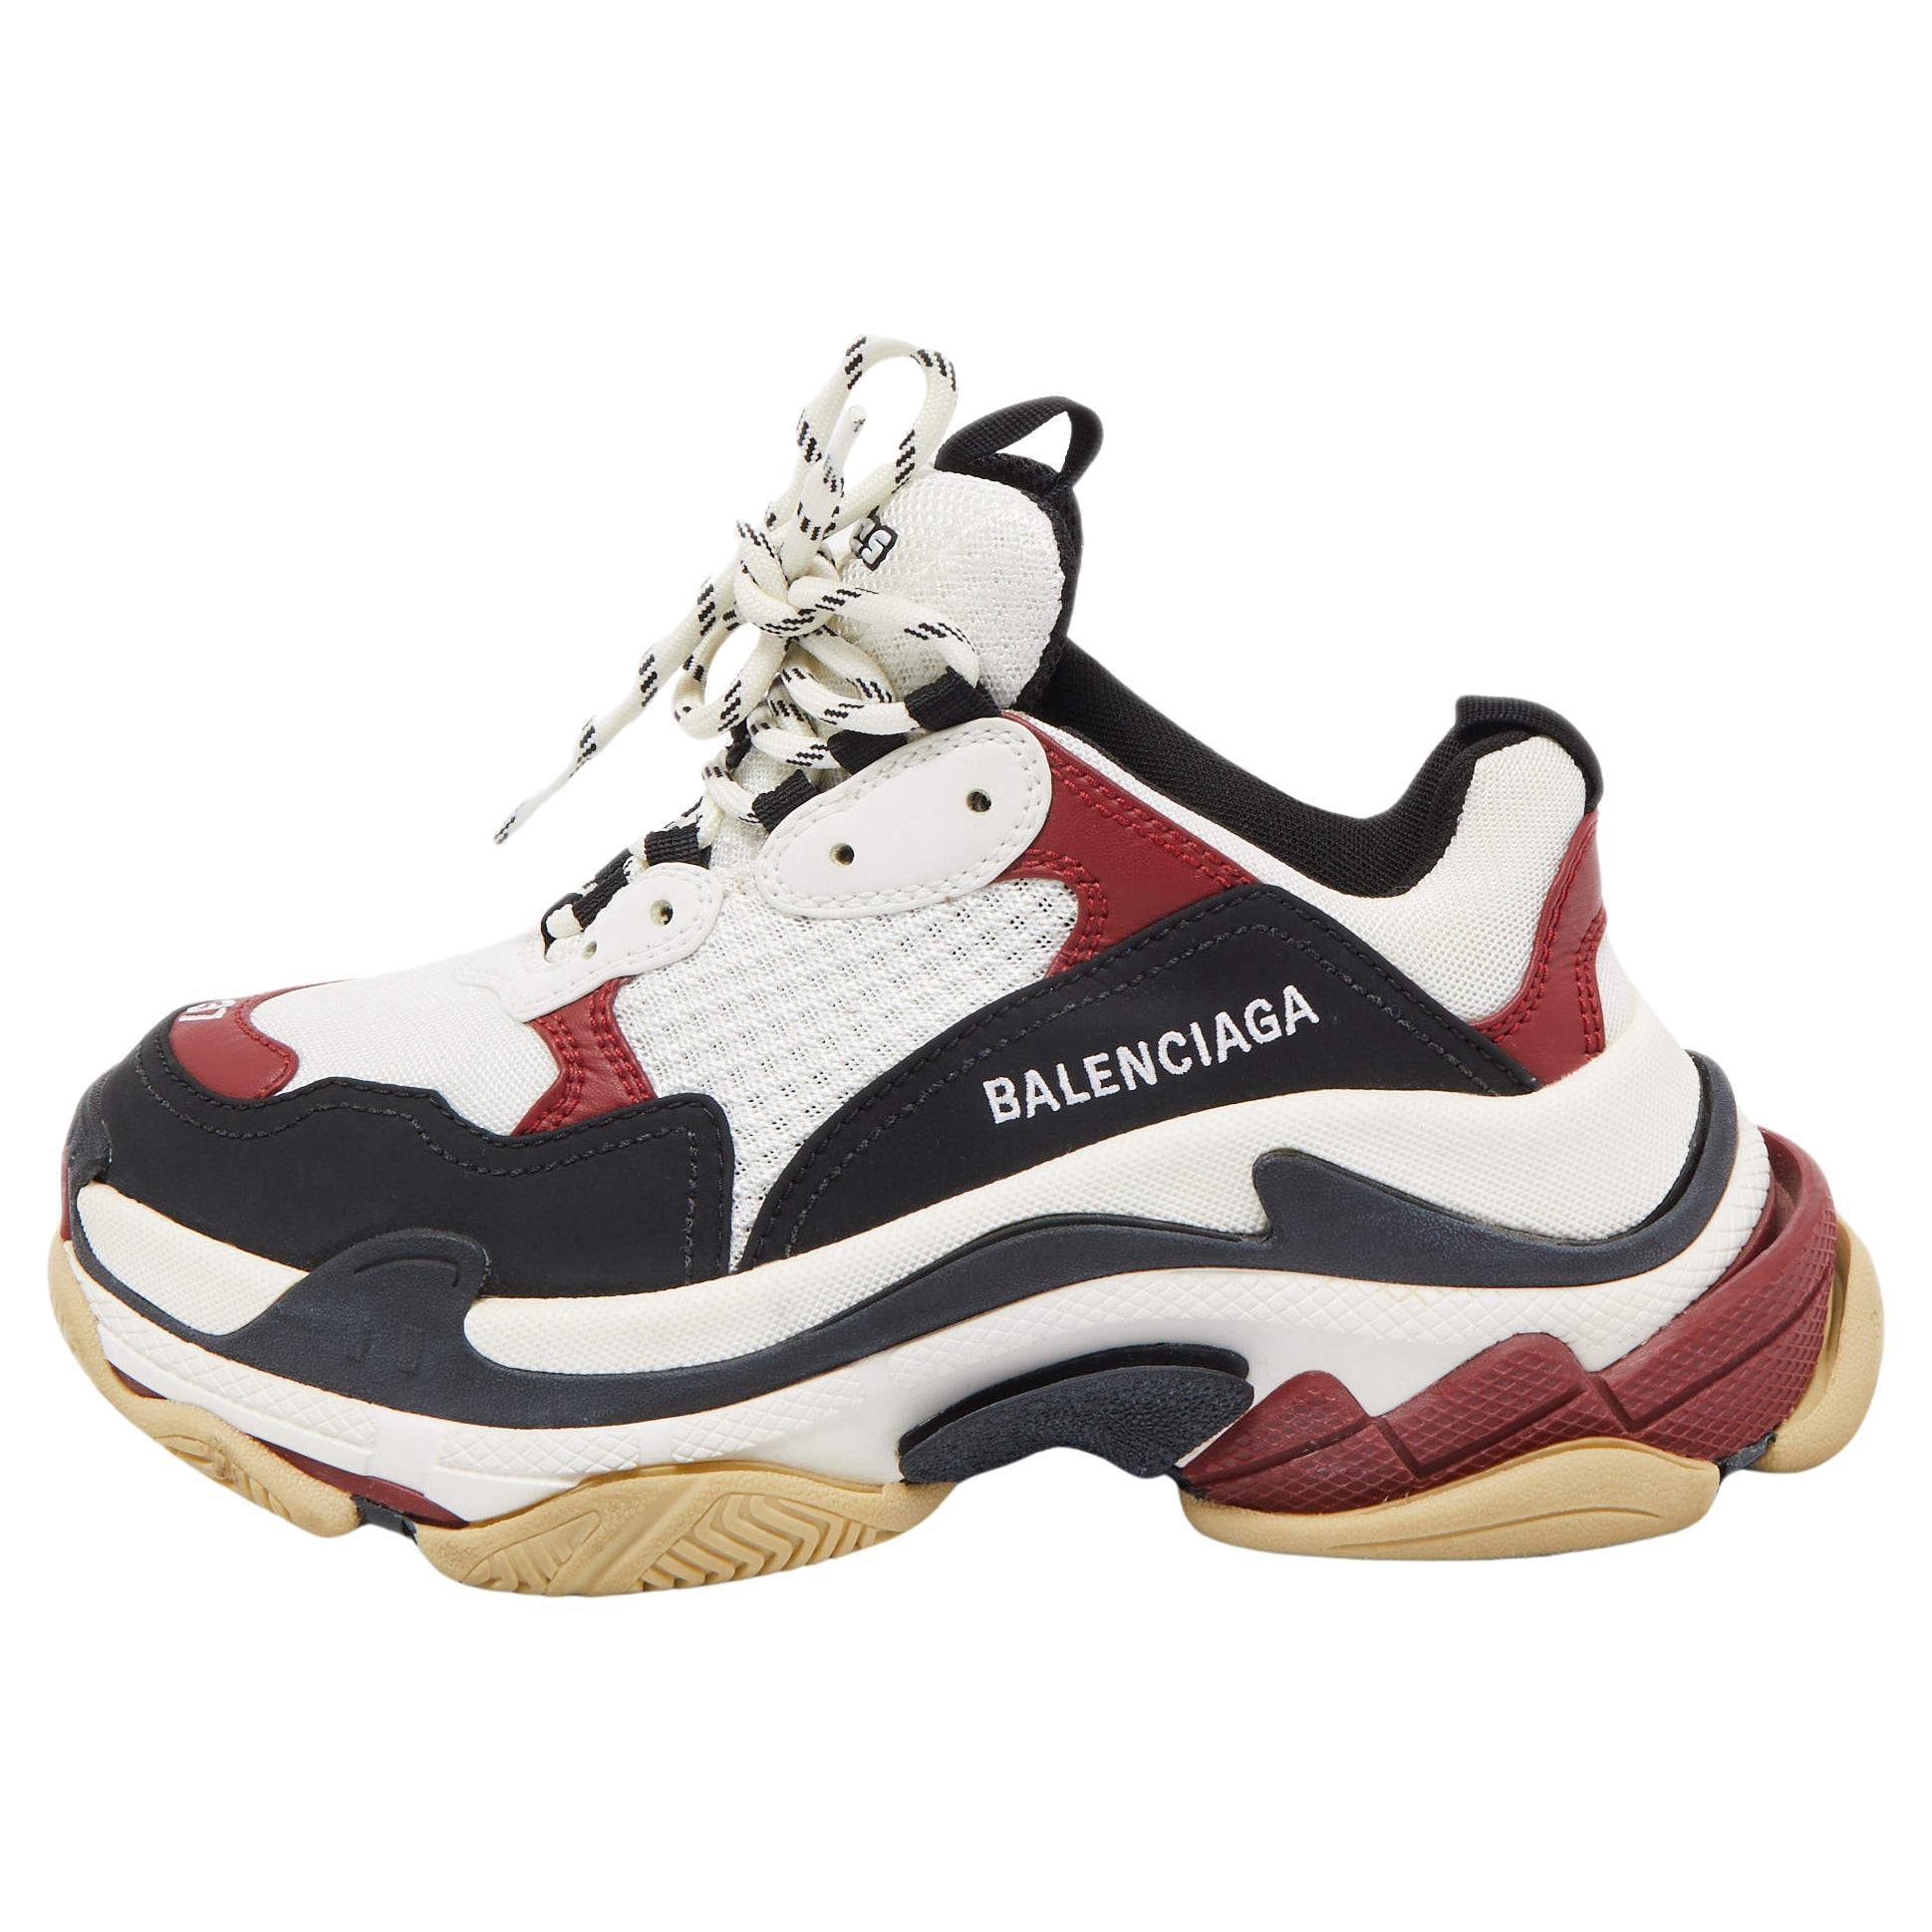 Balenciaga Tricolor Nubuck Leather and Mesh Triple S Low Top Sneakers Size 37